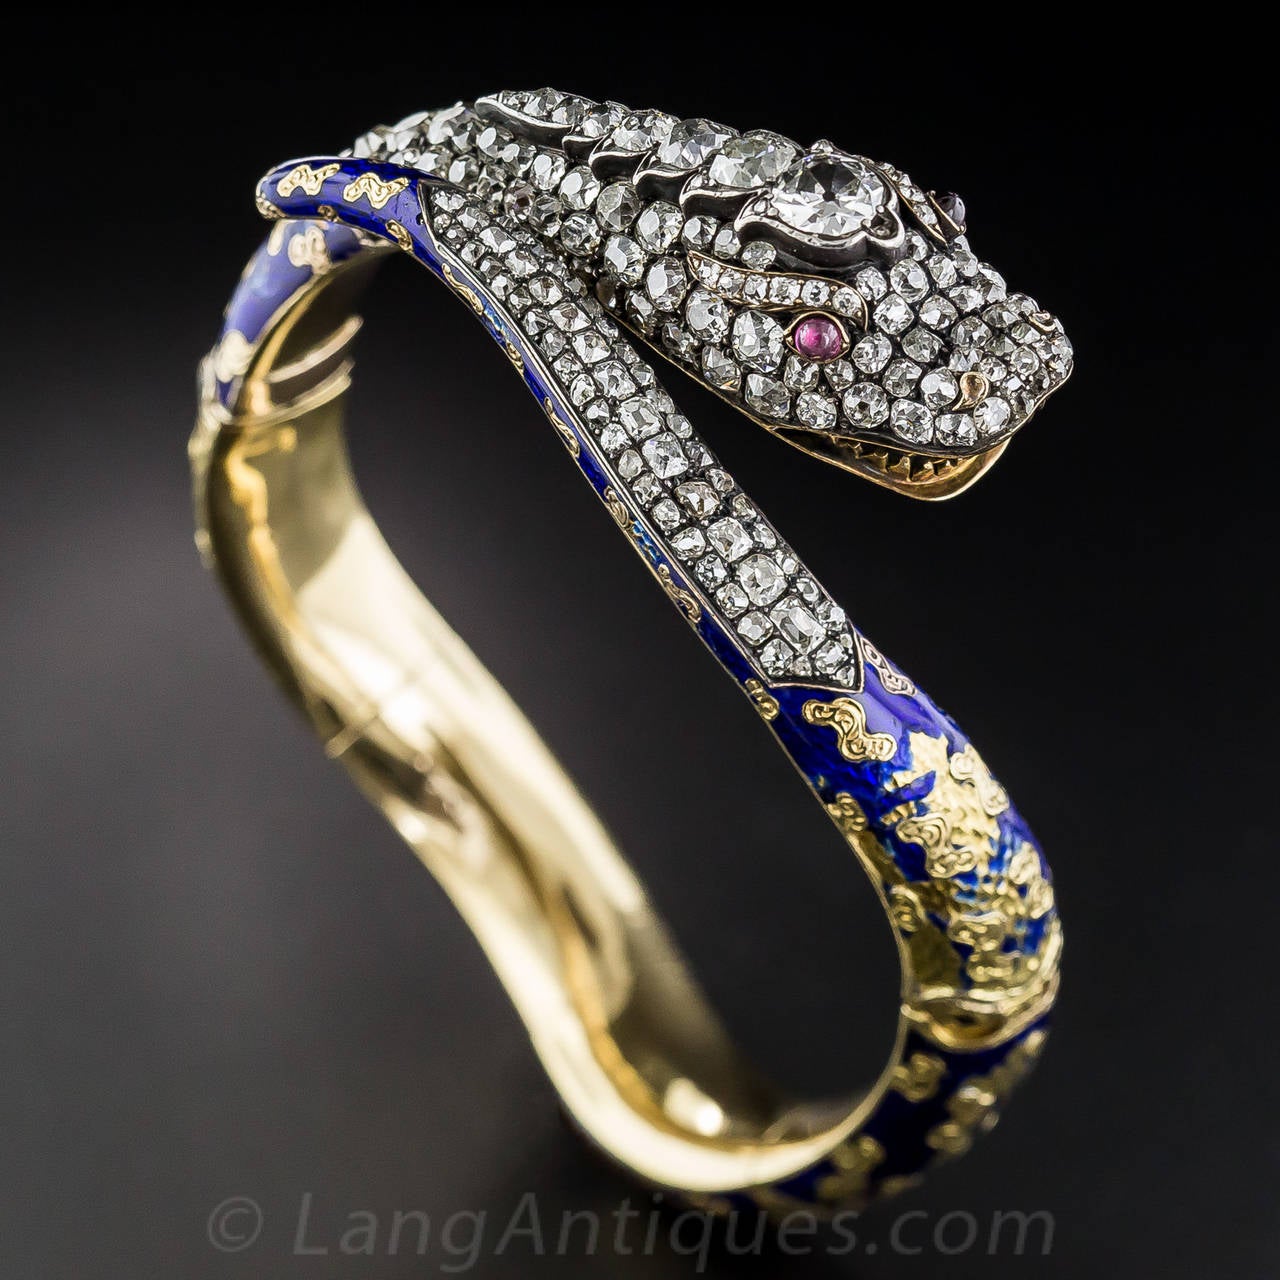 Striking barely begins to describe this exemplary early-Victorian snake bracelet - circa 1840 - magnificently handcrafted in silver over rich 18K yellow gold and packed to the hilt with over 12 carats of bright-white old mine-cut diamond sparklers,